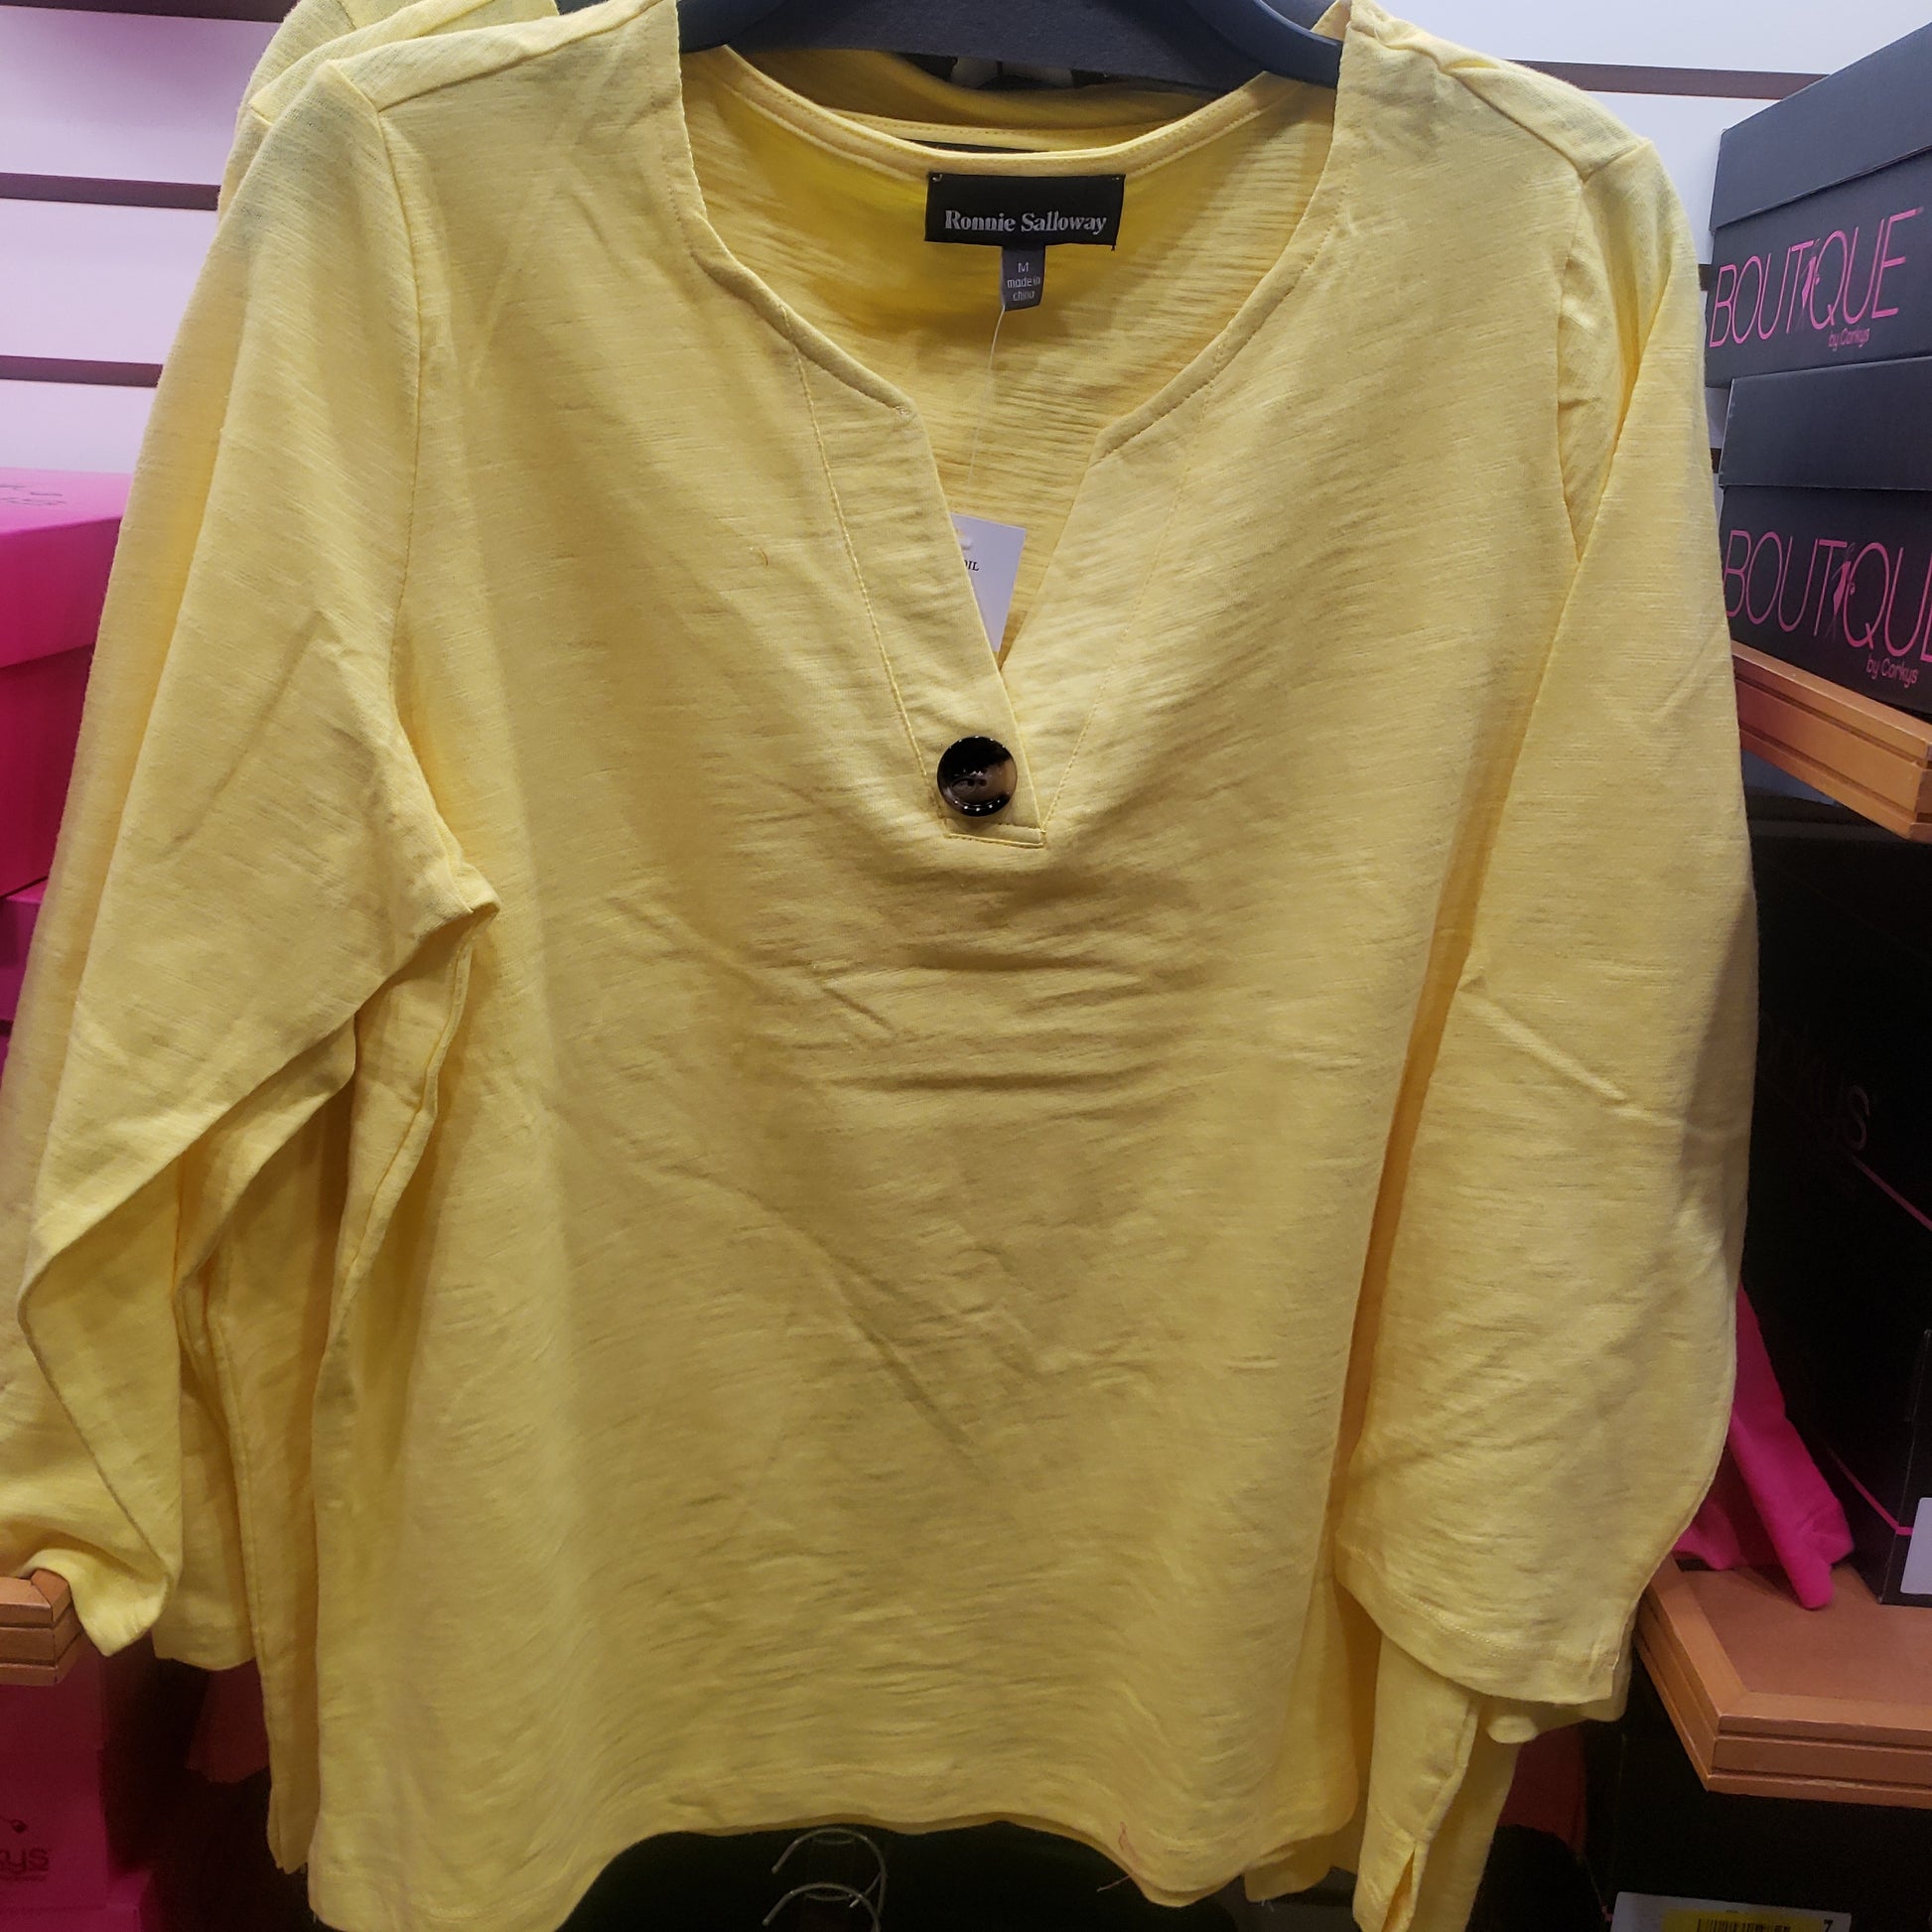 A 3/4 Sleeve Button Accent Cotton Top in Yellow from RONNIE SALLOWAY & CO INC is displayed on a hanger in a clothing store.